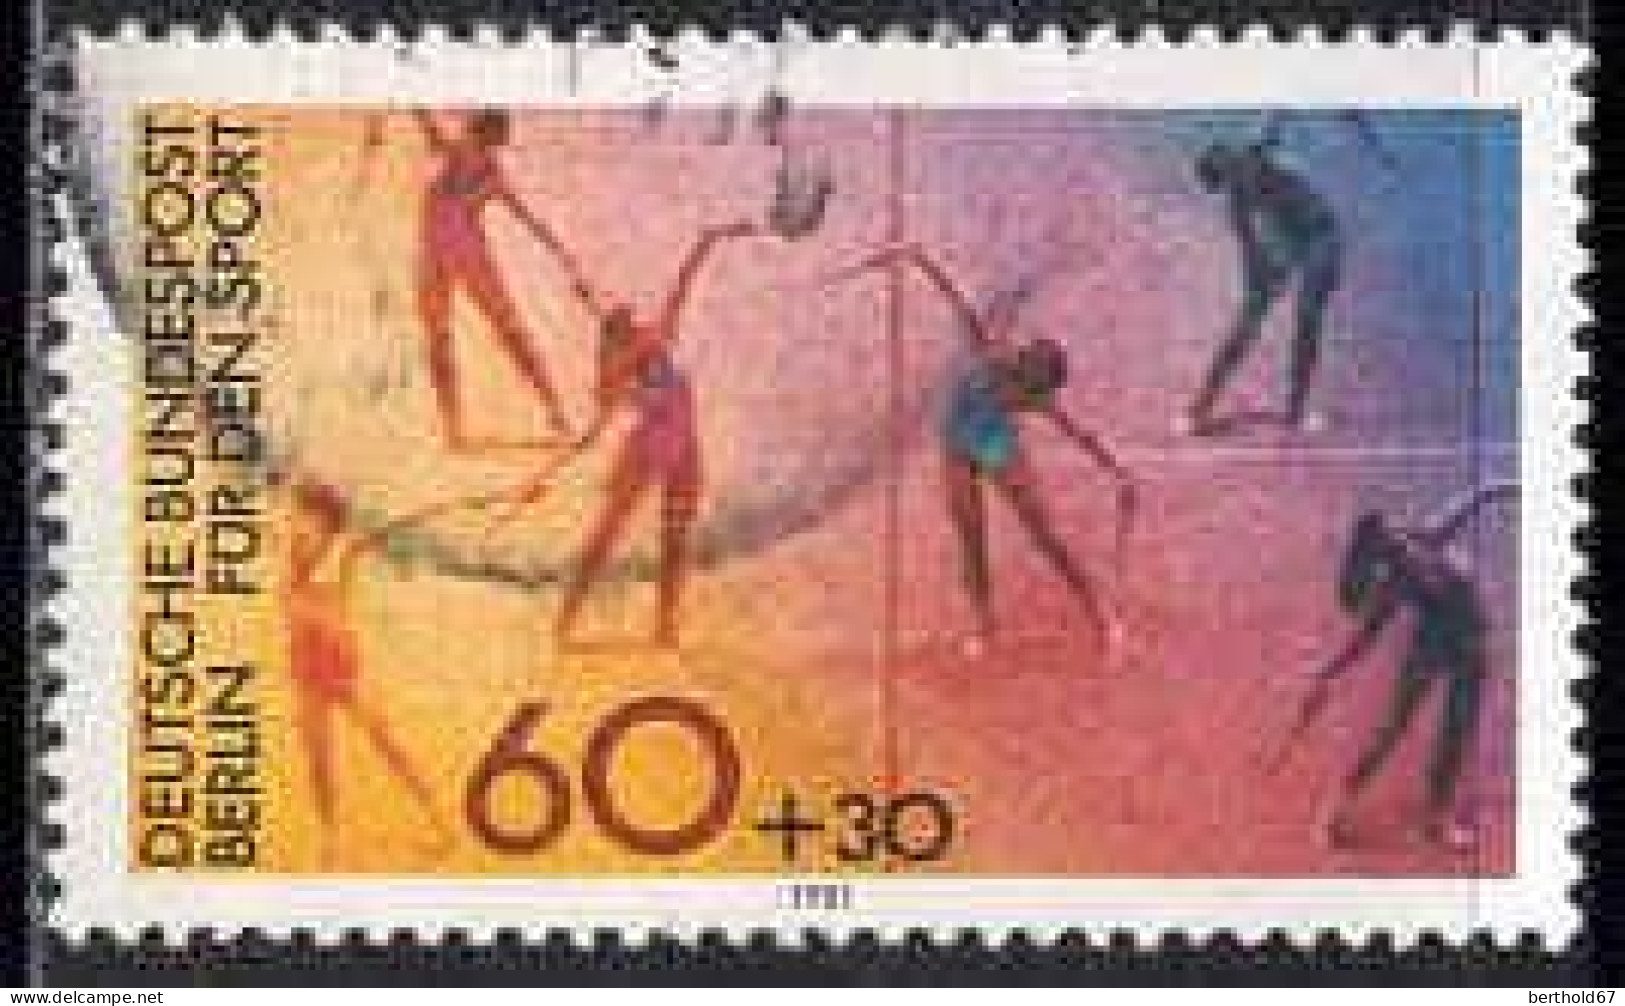 Berlin Poste Obl Yv:606/607 Pour Le Sport Gymnastique & Course (cachet Rond) - Used Stamps